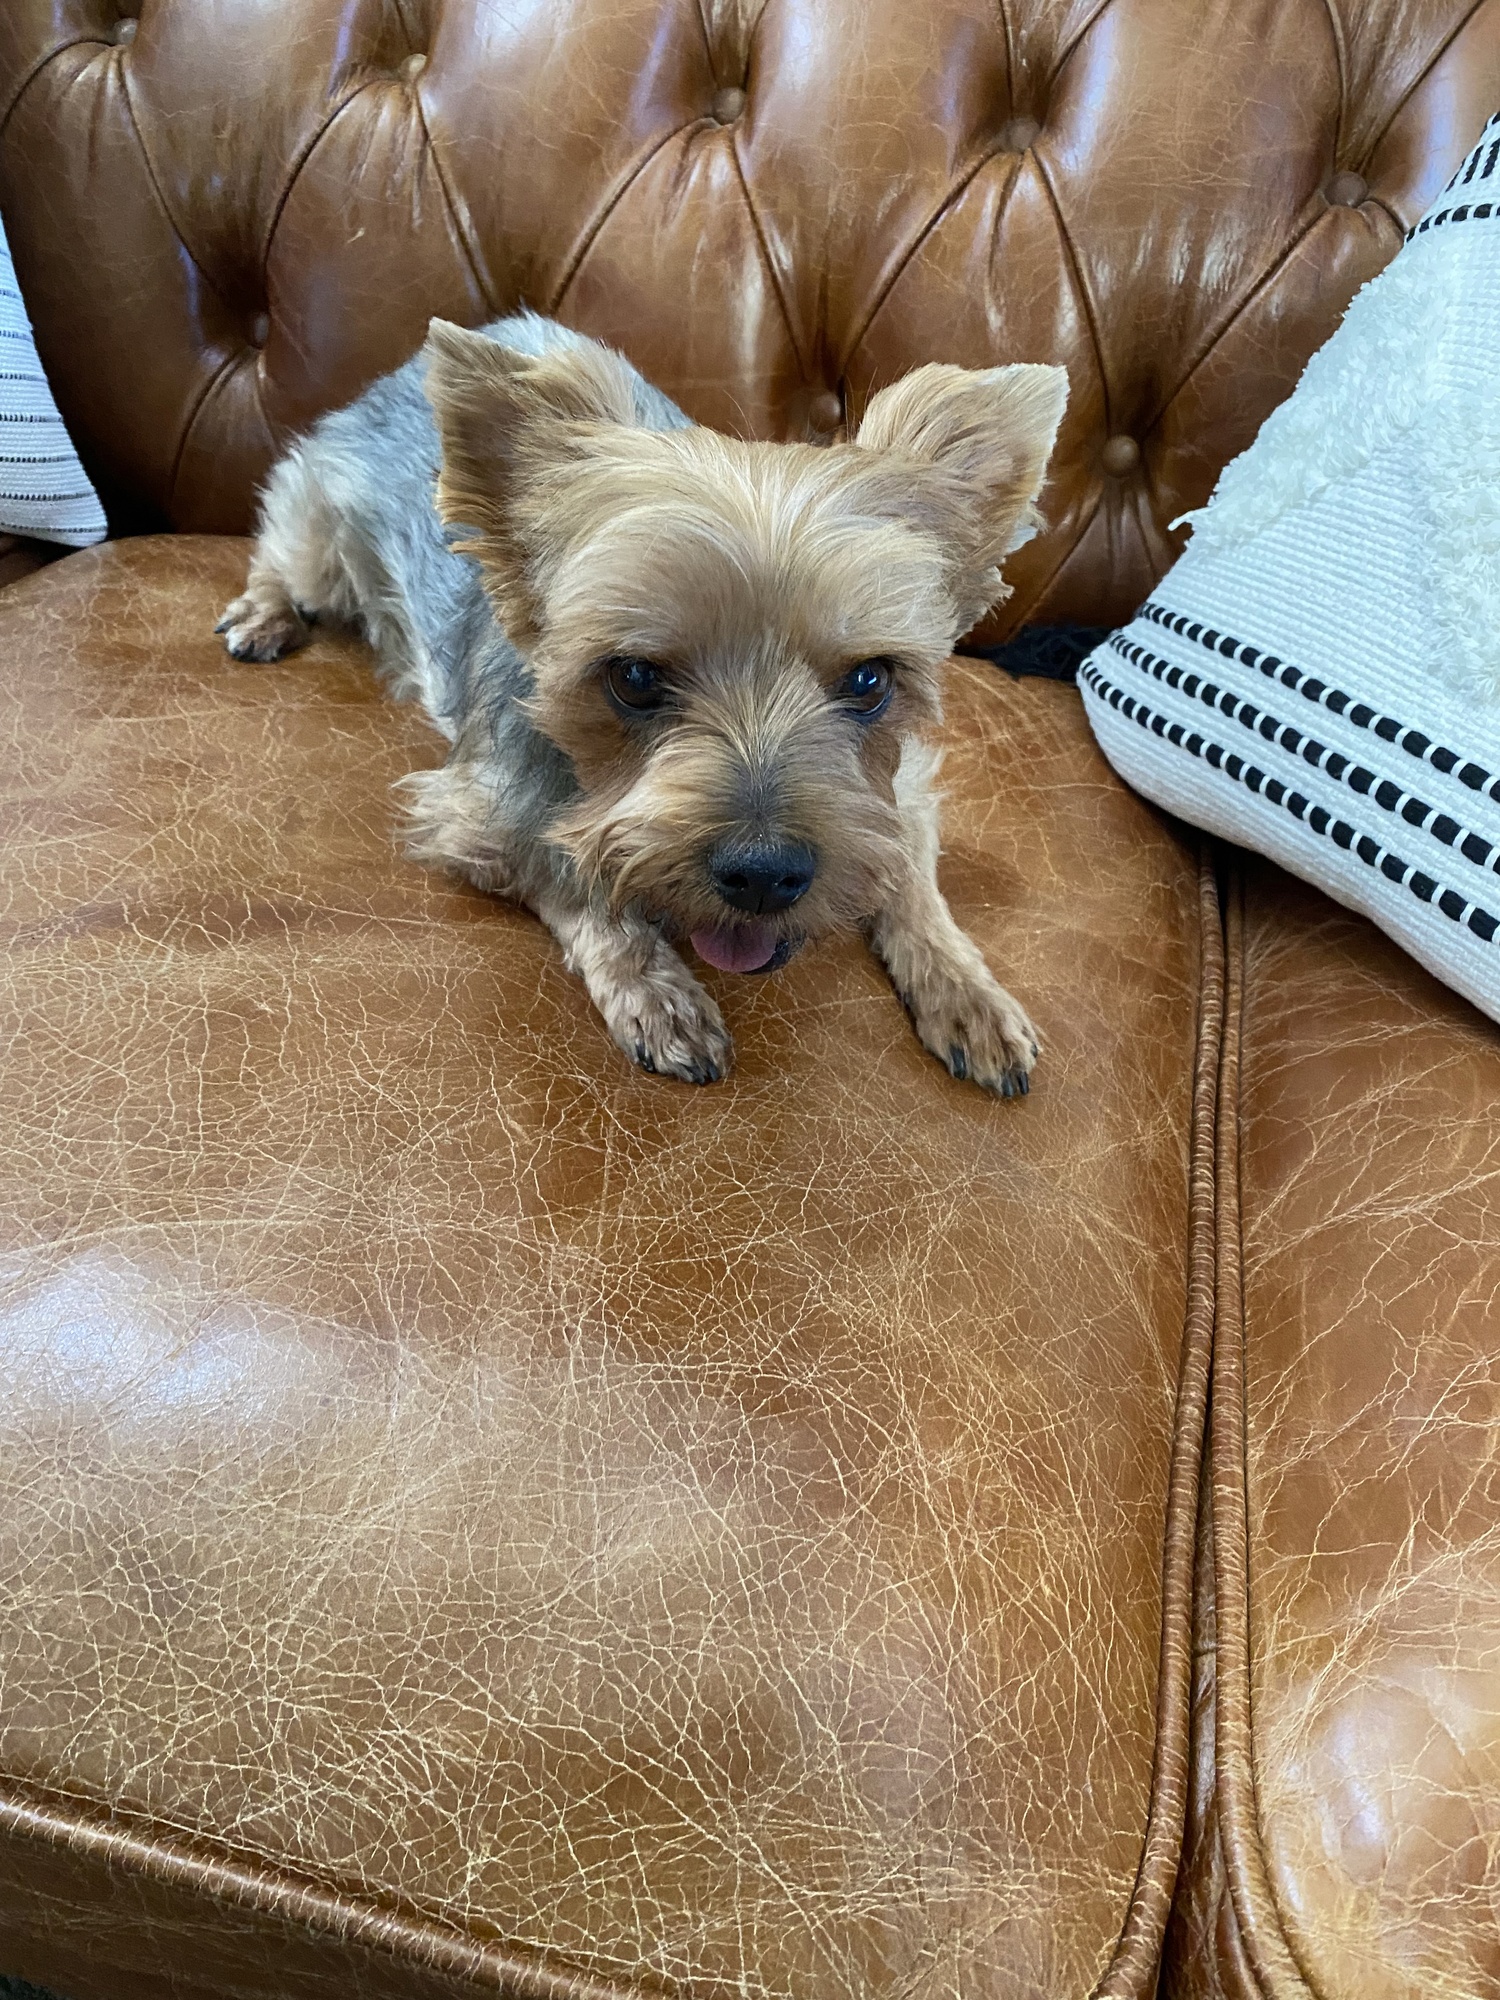 Rose is a tan and gray Yorkshire terrier laying on a brown leather couch looking up at the camera